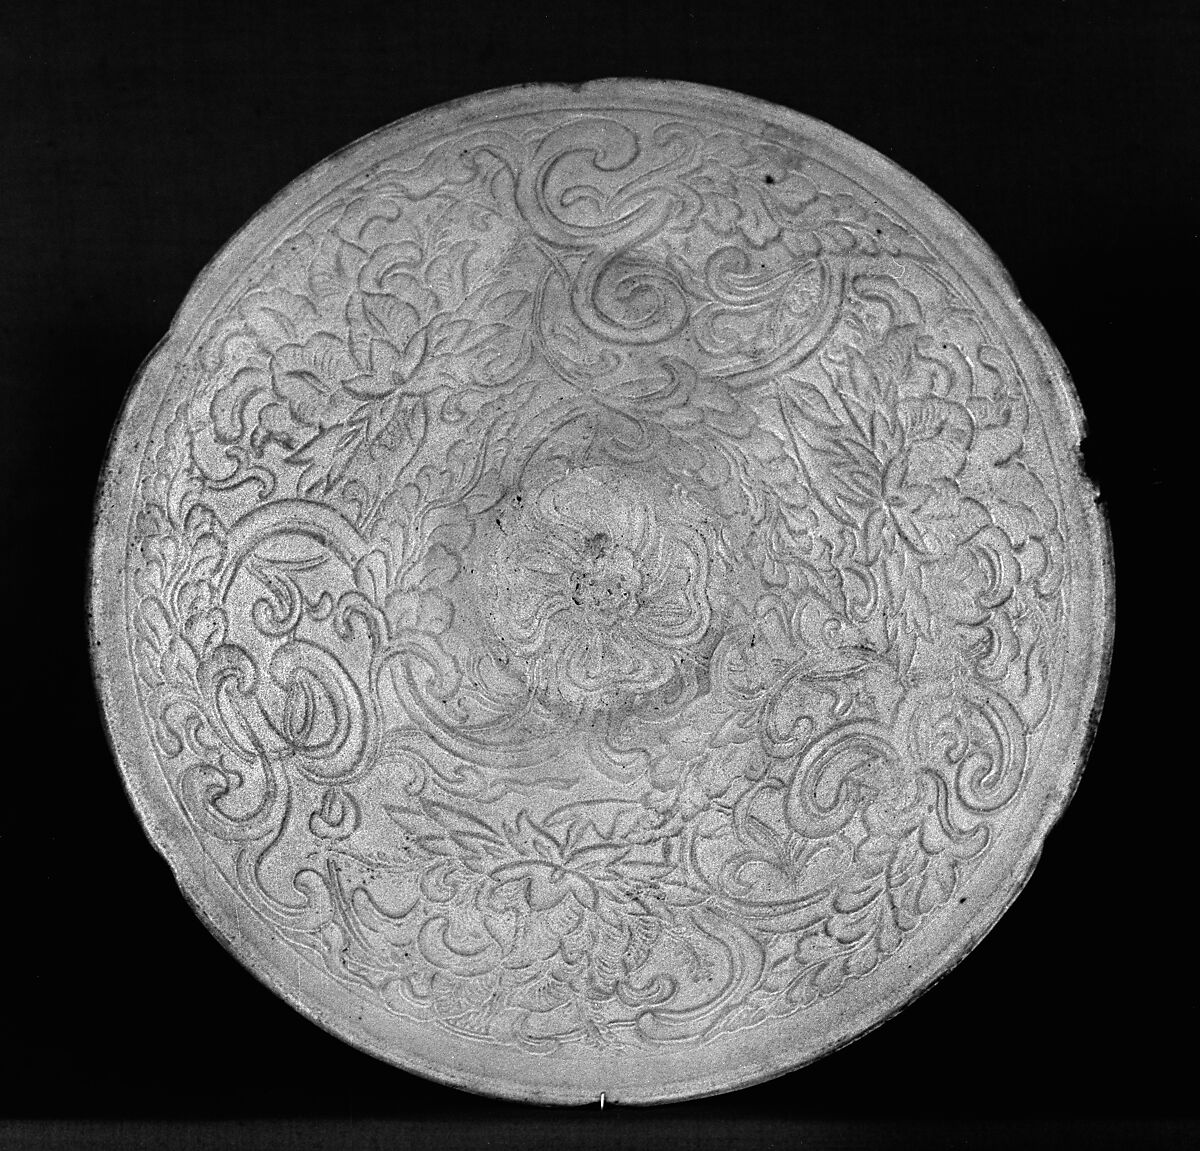 Bowl with floral scrolls, Porcelain with mold-impressed decoration (Ding-type ware), China 